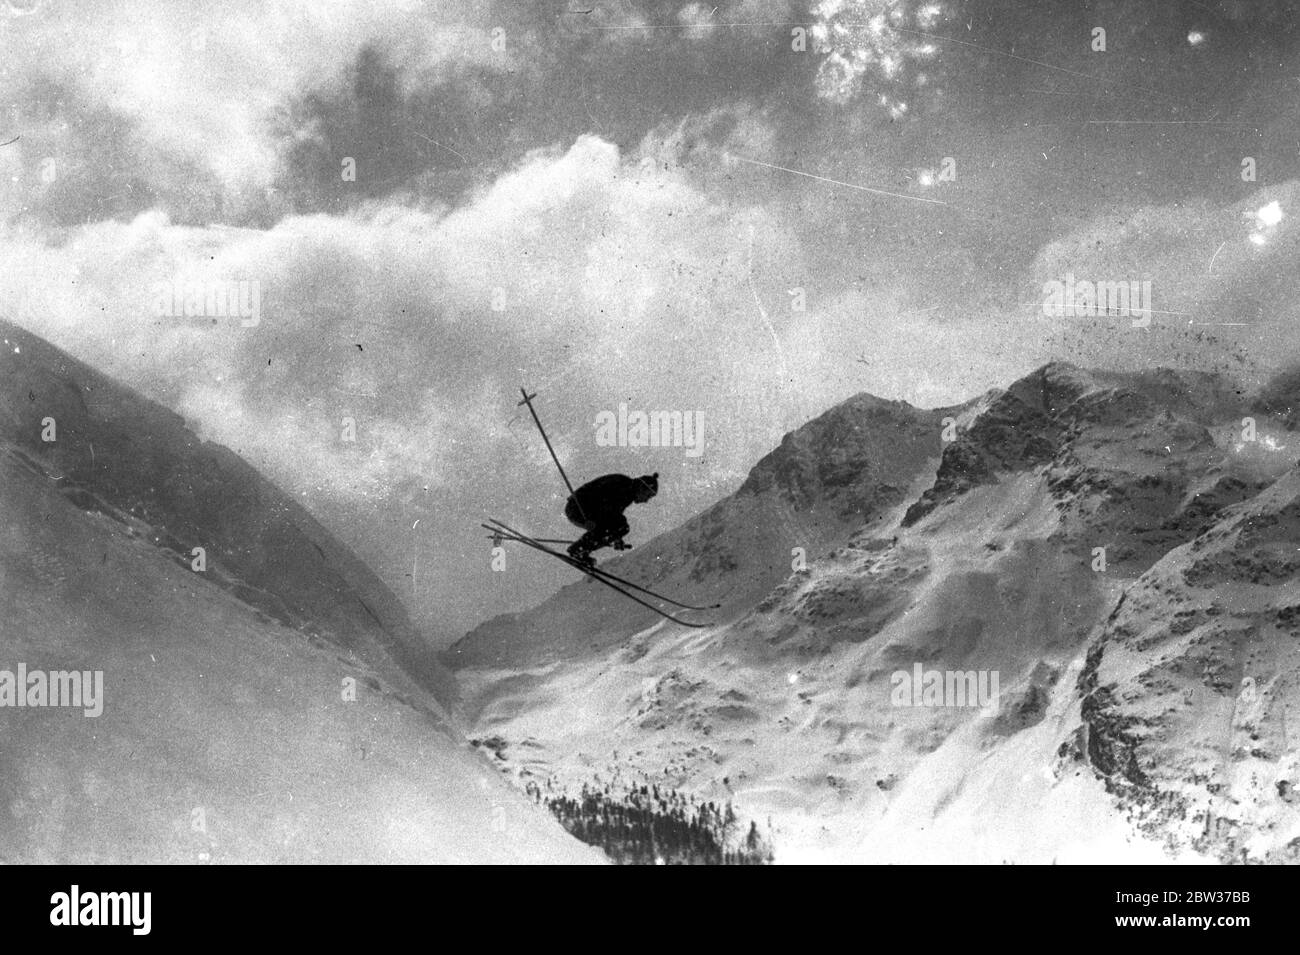 A daring leap at Swiss winter sports . A competitor in the Swiss winter sports now taking place at St Moritz , makes a daring leap in the Alps . 30 December 1933 Stock Photo